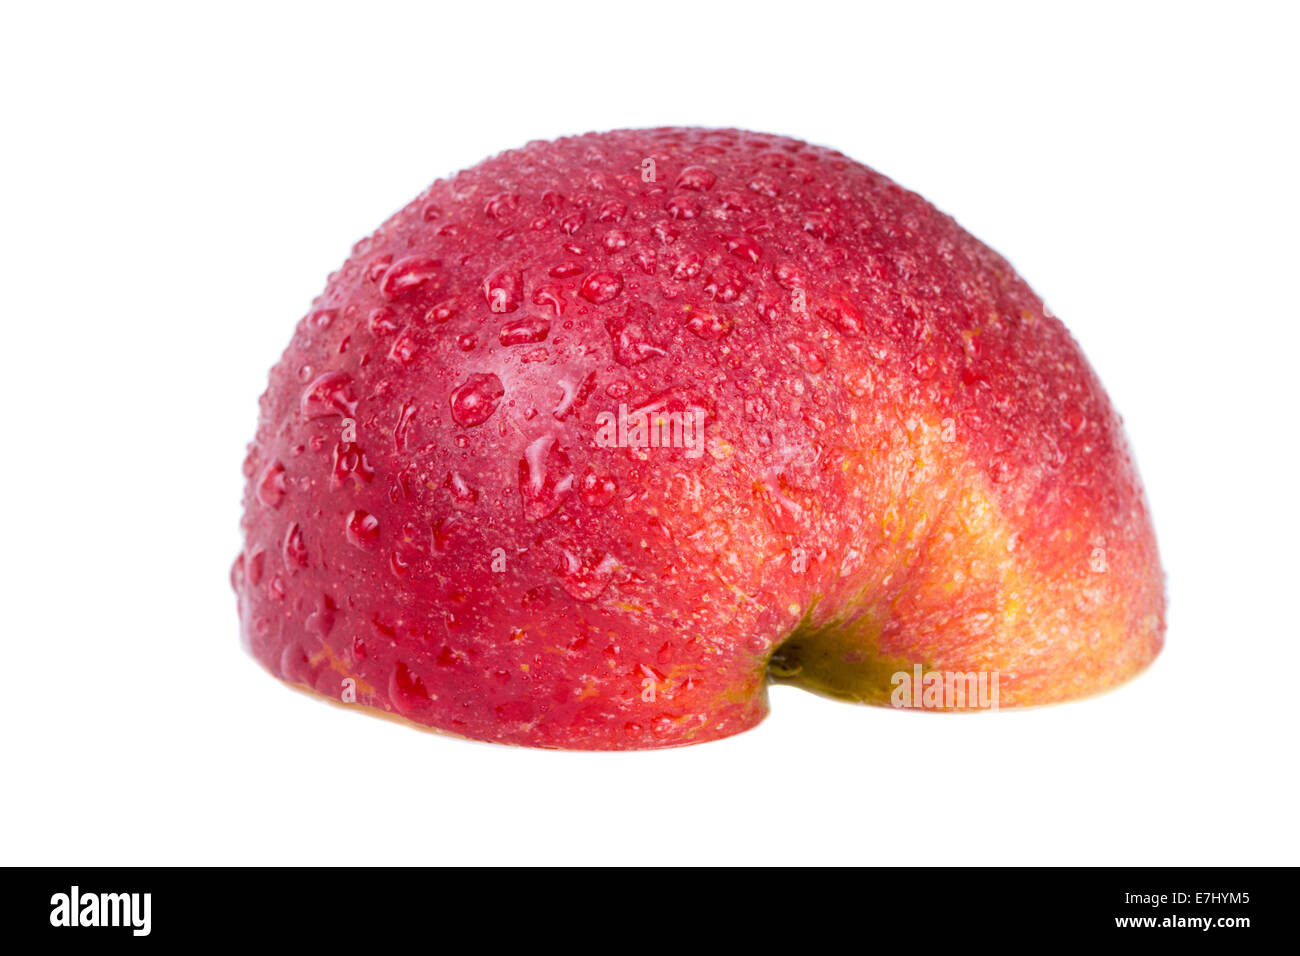 Half of an red apple with water drops isolated on white background Stock Photo